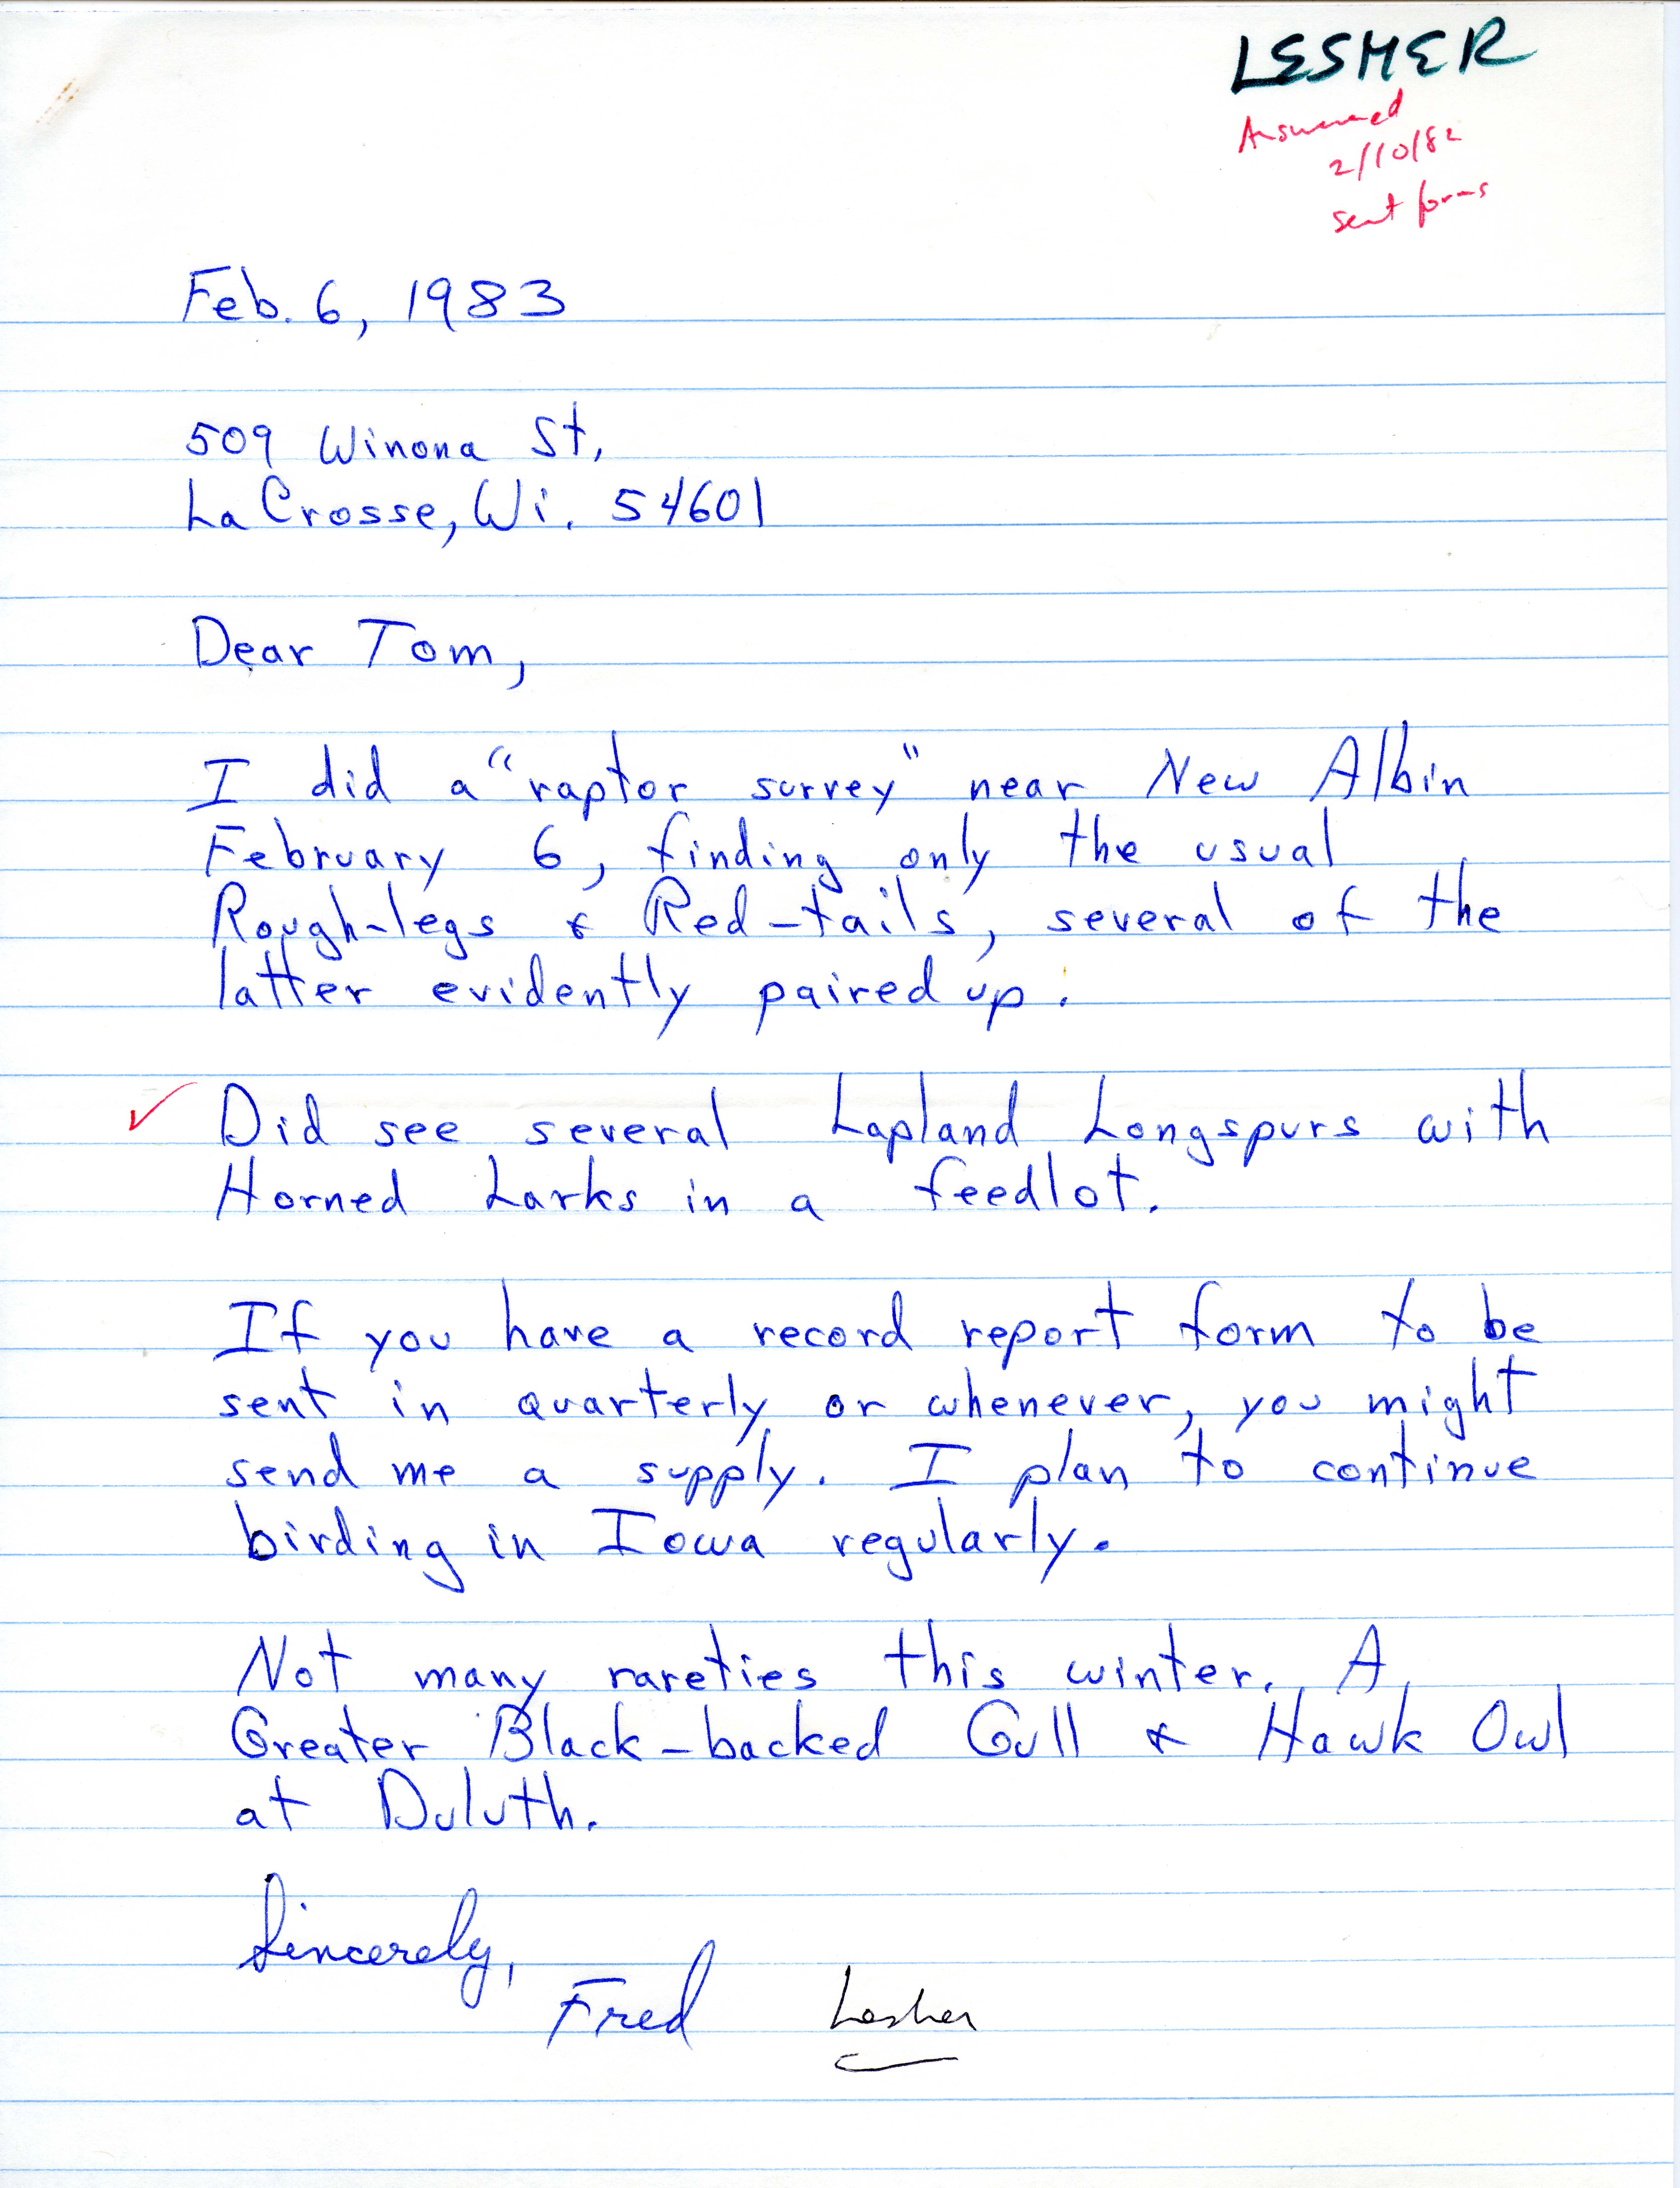 Fred Lesher letter to Thomas H. Kent regarding a raptor survey and winter bird sightings, February 6, 1983